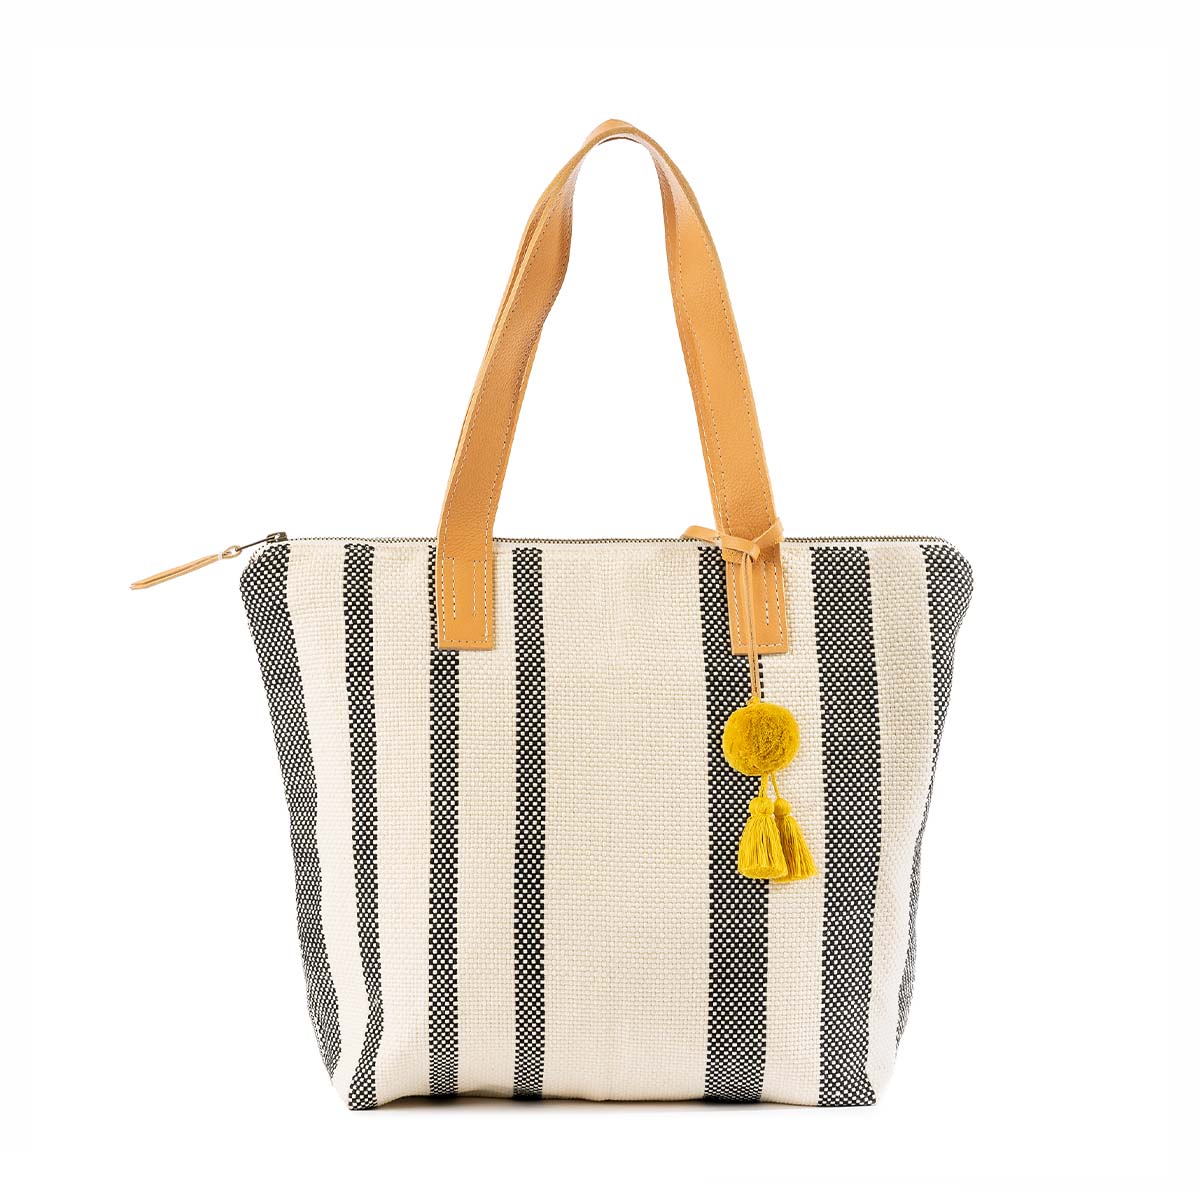 The front of the hand woven artisan Angela Tote in Tourmaline pattern. It has grey and white vertical stripes, leather handles, and a yellow pompom-tassel combination.